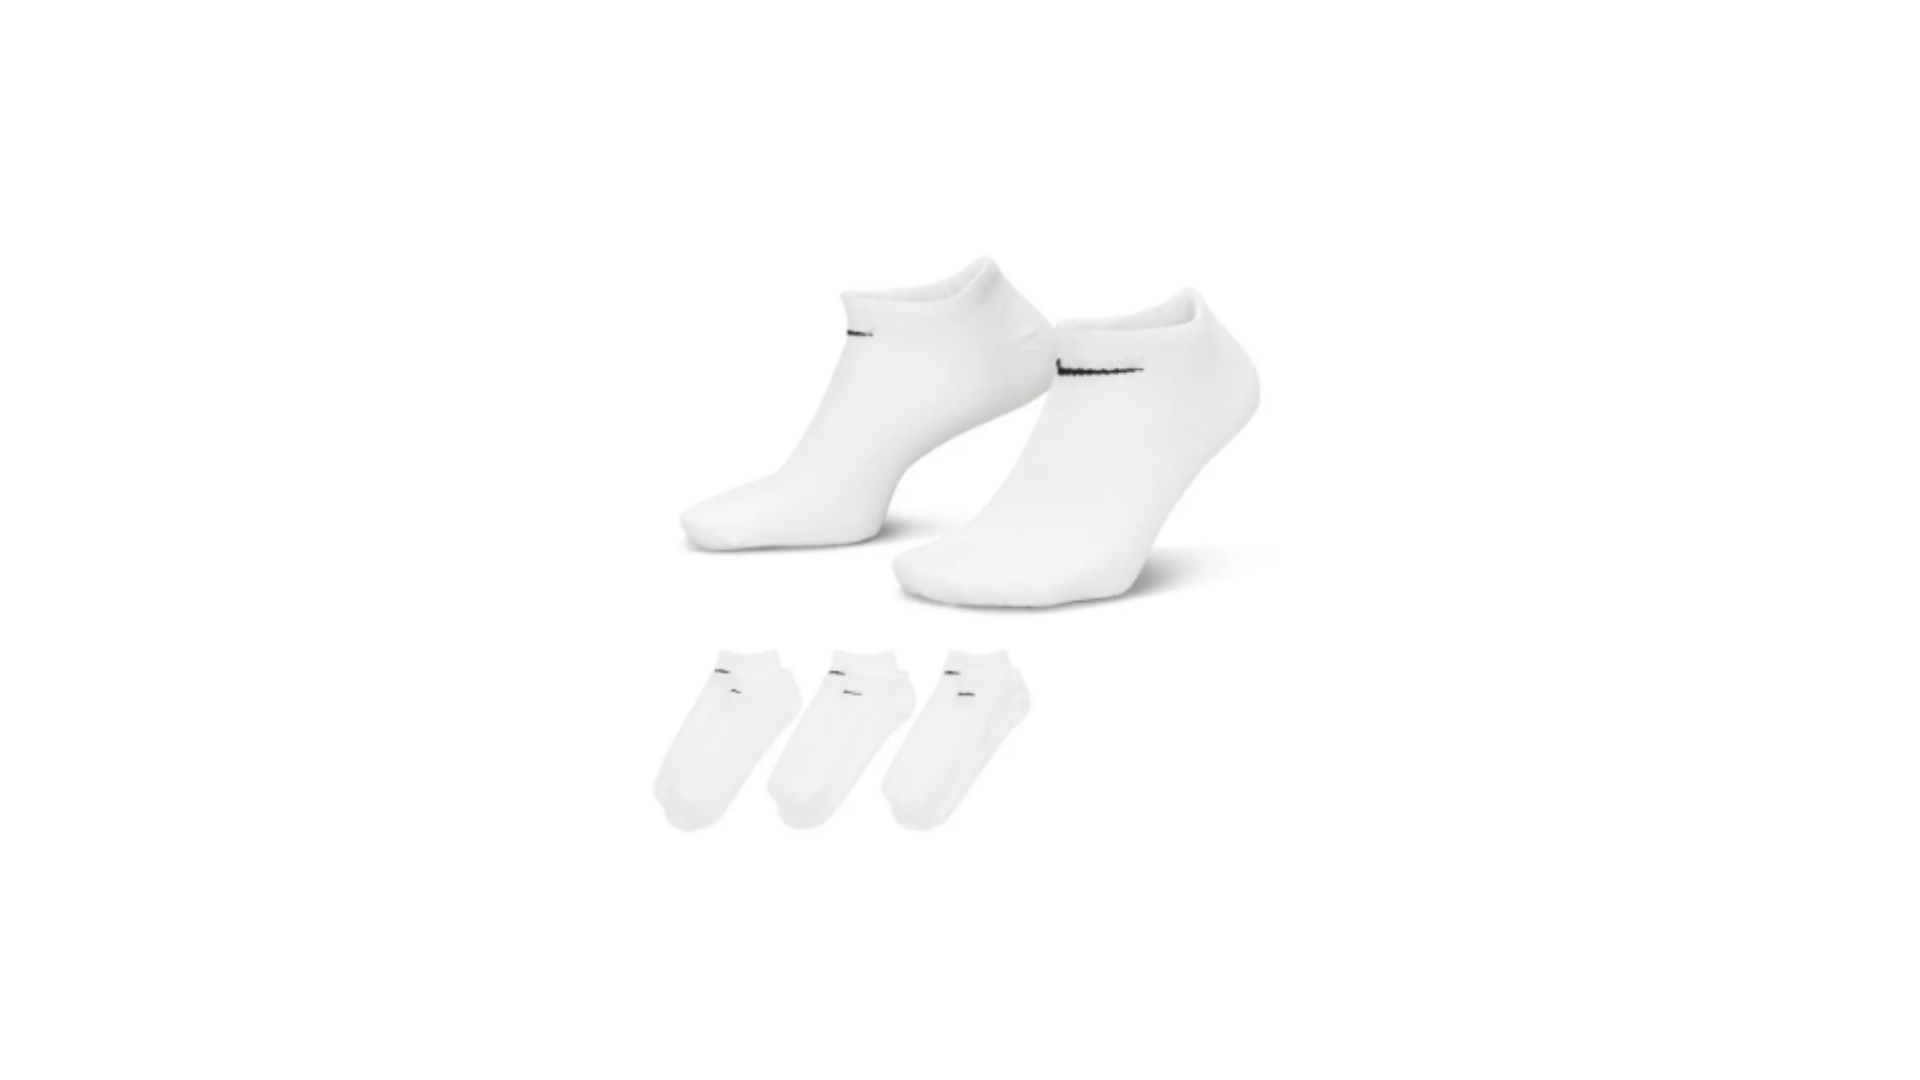 CHAUSSETTES NIKE EVERYDAY LIGHTWEIGHT COURTES BLANCHES - Angers SCO